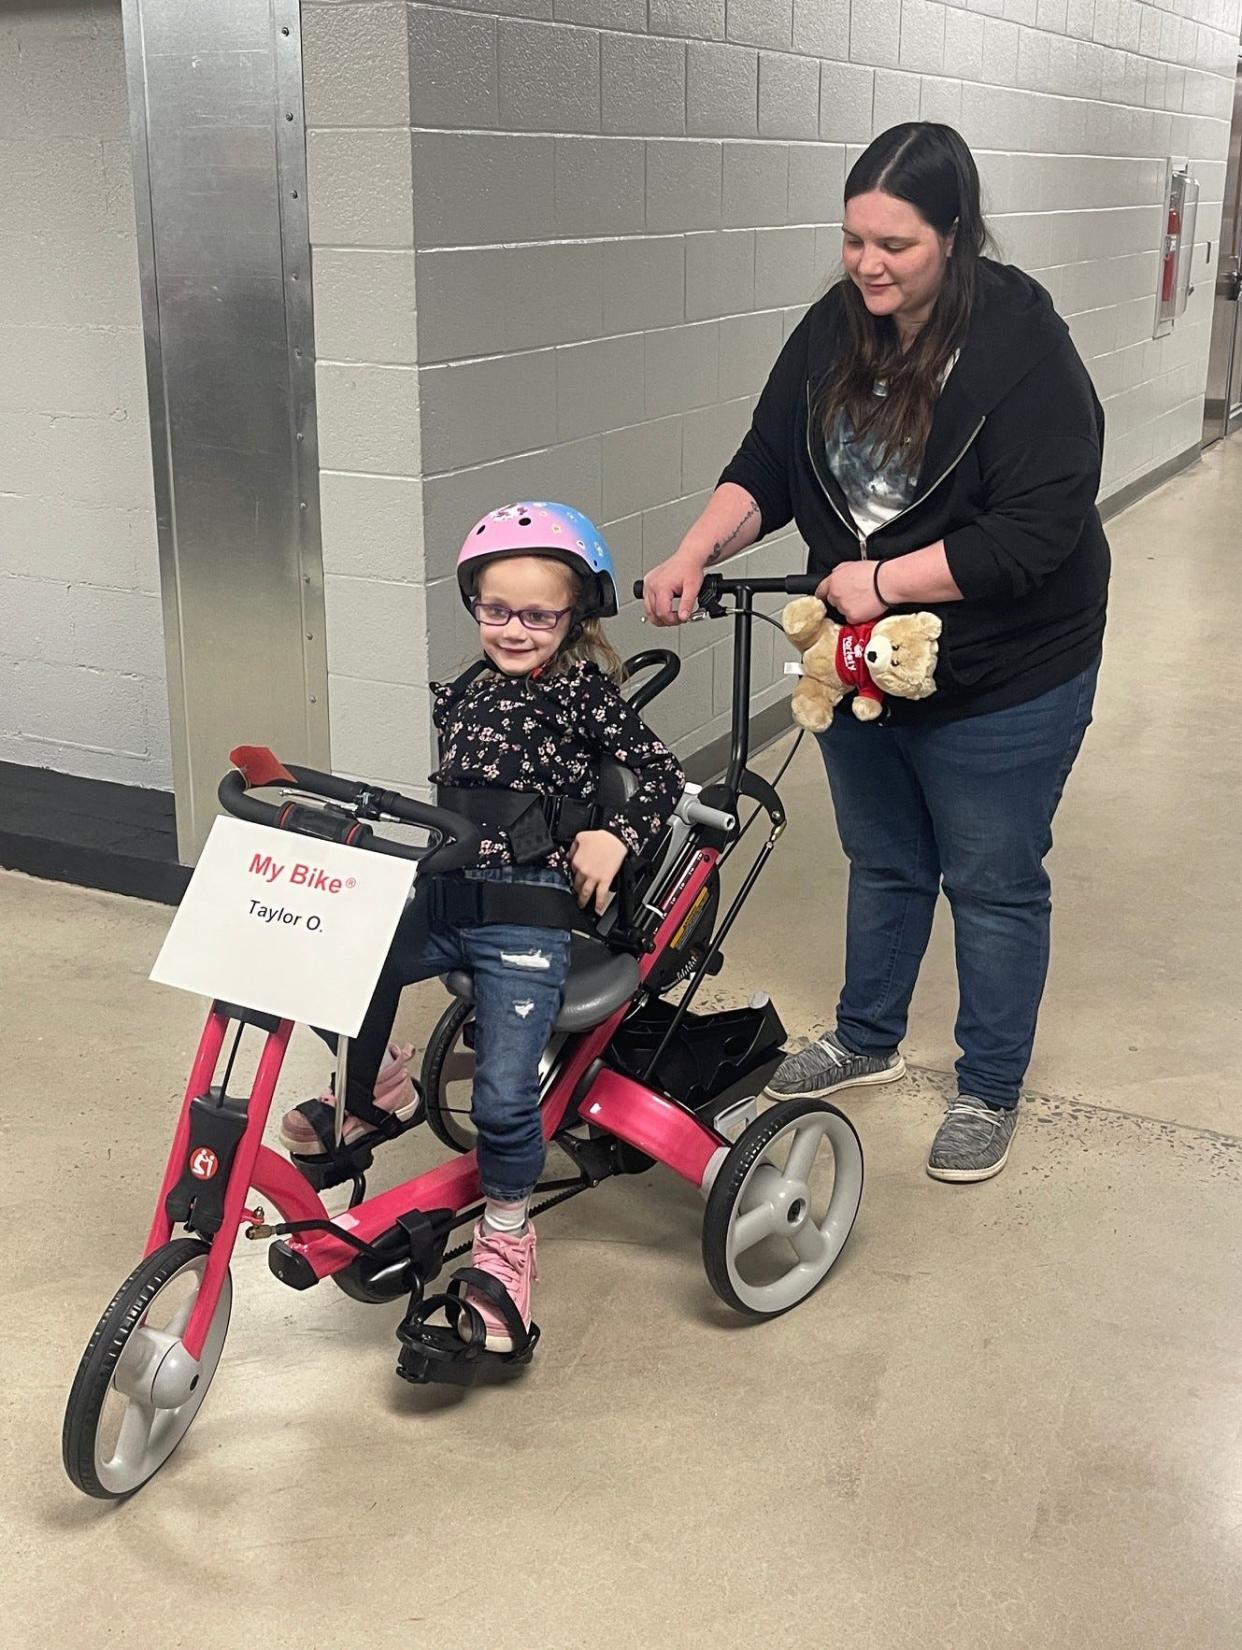 Taylor Ogline sits on her new adaptive bike from Variety, the Children's Charity as her mom, Kaylee Ogline, watches. The Oglines live in Somerset.